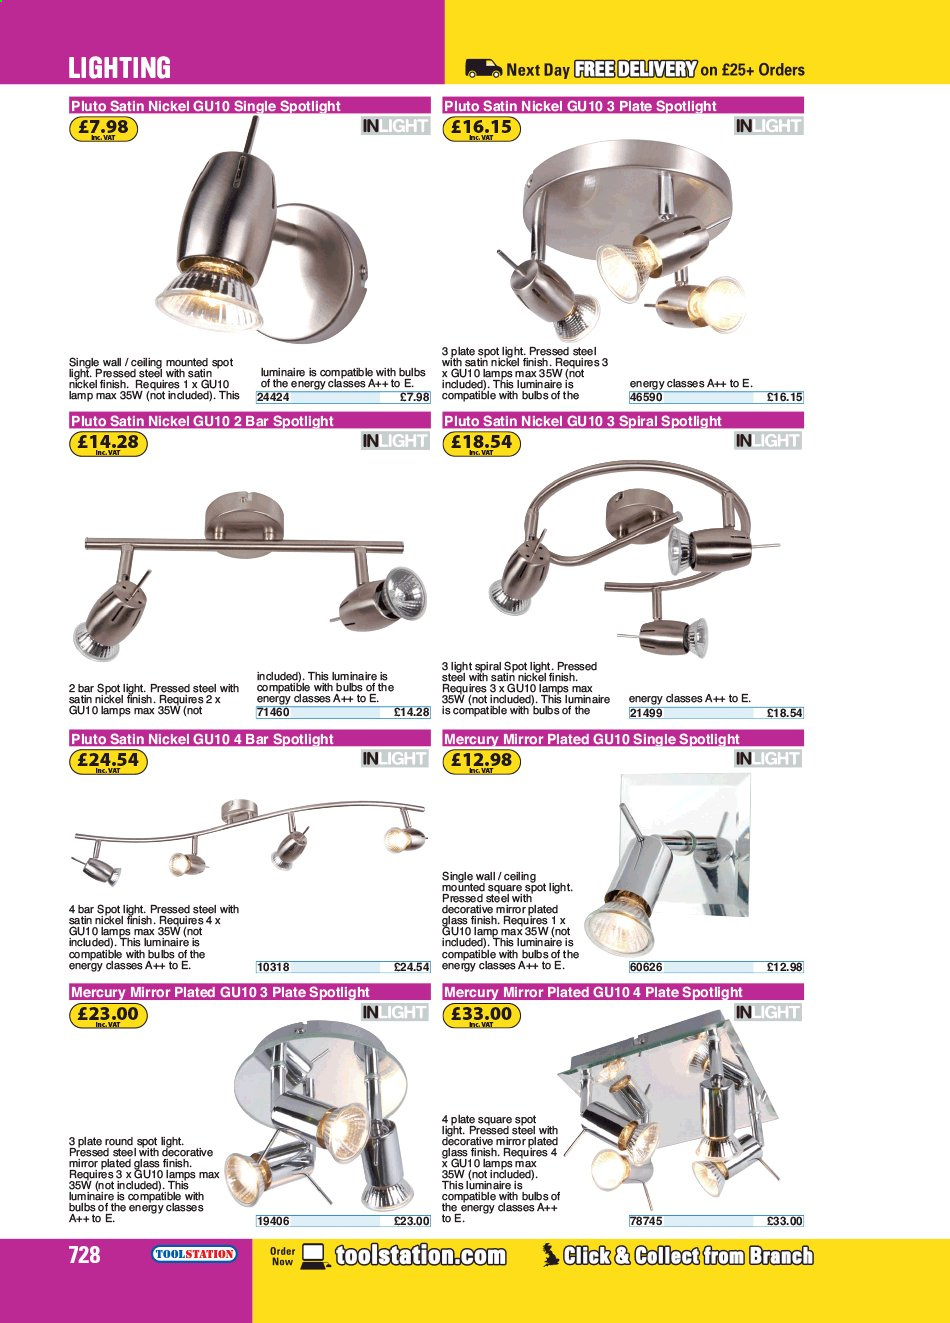 Toolstation offer . Page 728.